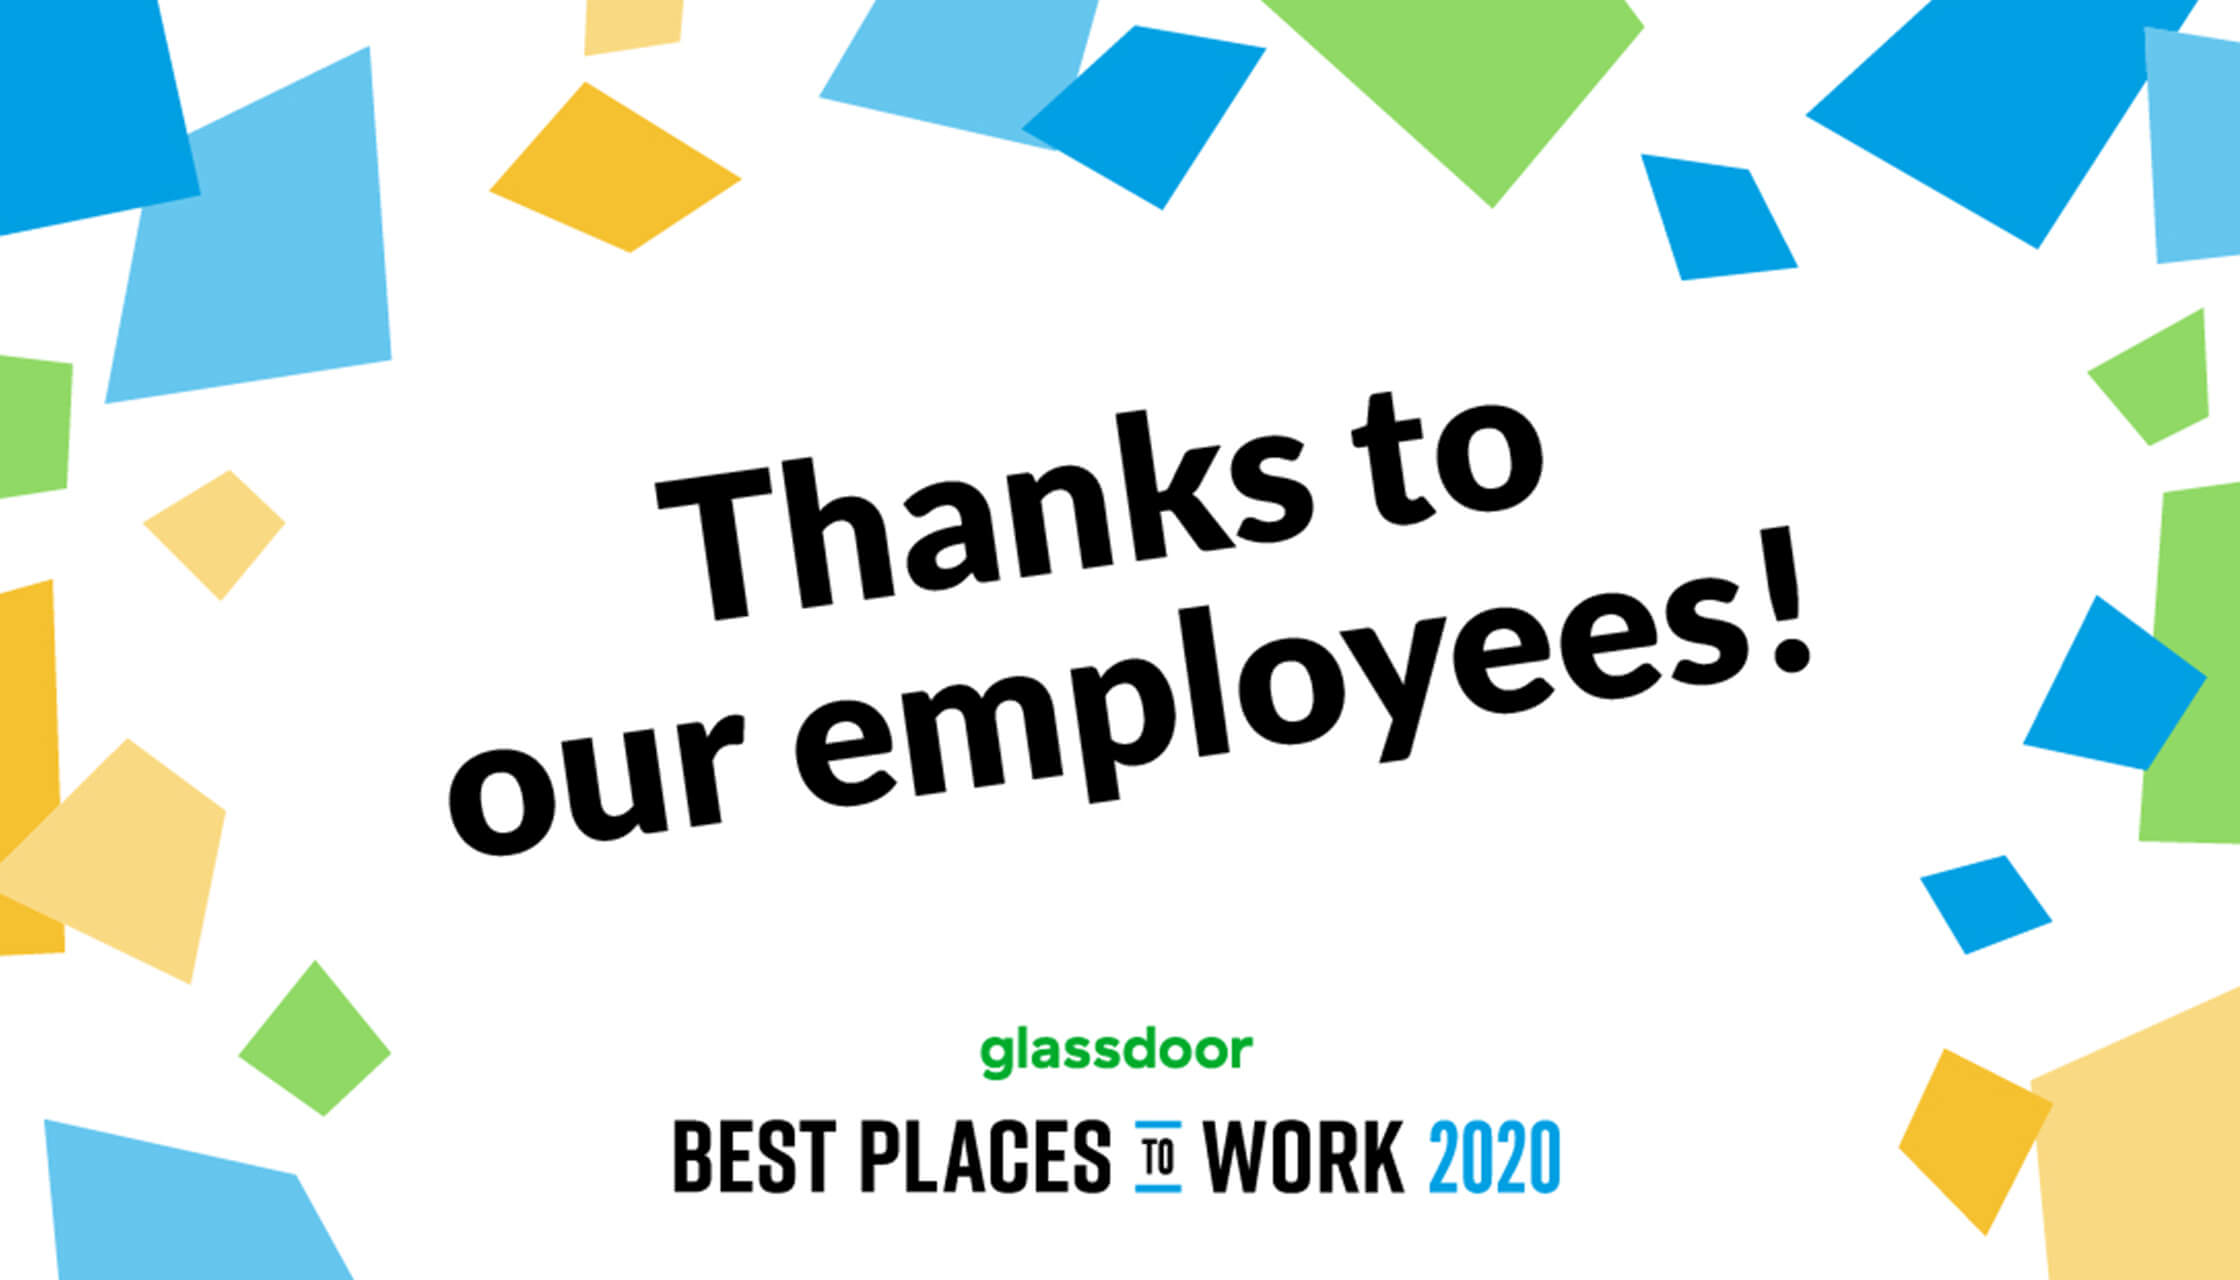 We're a Glassdoor 100 Best Places to Work!